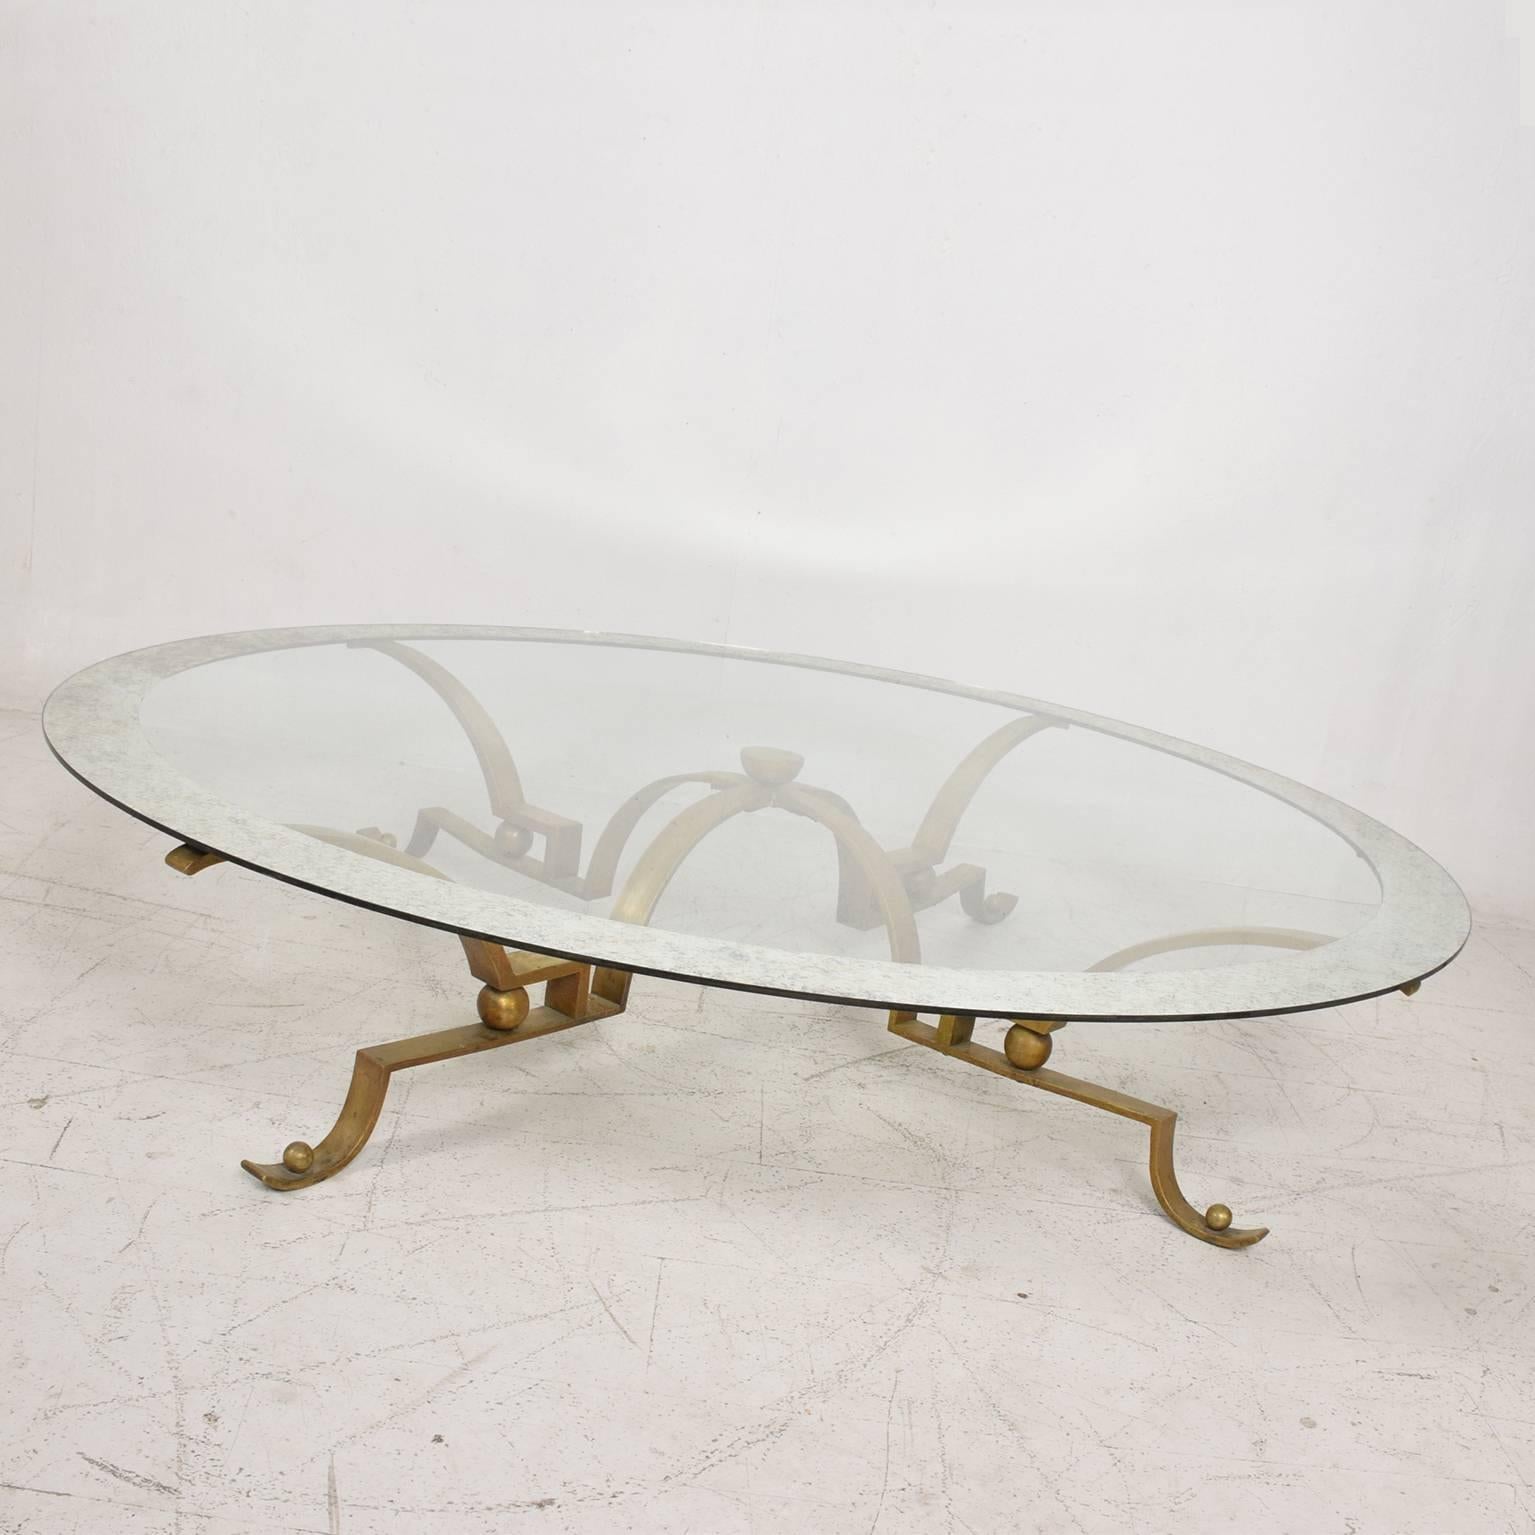 For your consideration a cocktail table by Arturo Pani.
Beautiful and unique design in solid brass. Large glass top (60" in diameter) has an antique mirror band (about 3")
Original patina.
Mexico, circa 1950s
Dimensions: 60"